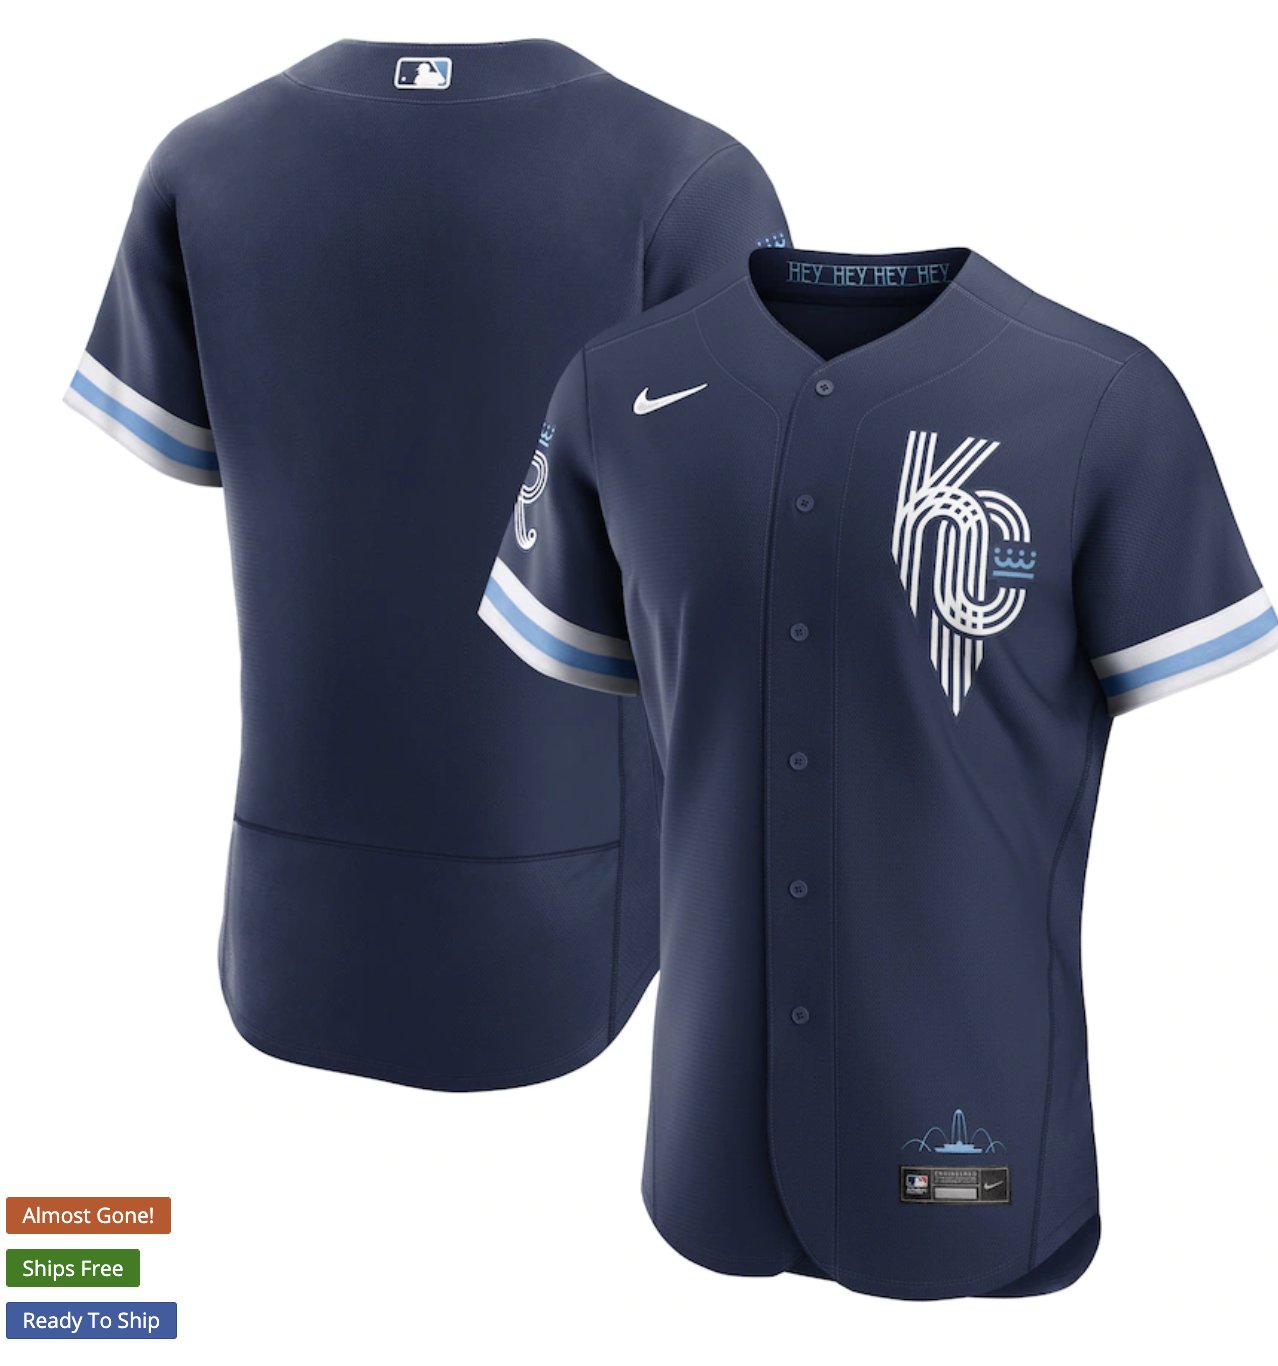 Chris Creamer  SportsLogos.Net on X: So Which one's your favourite??  The unveiling of the new KC Royals #CityConnect jersey brings us up to ten  of the scheduled fourteen we'll see before